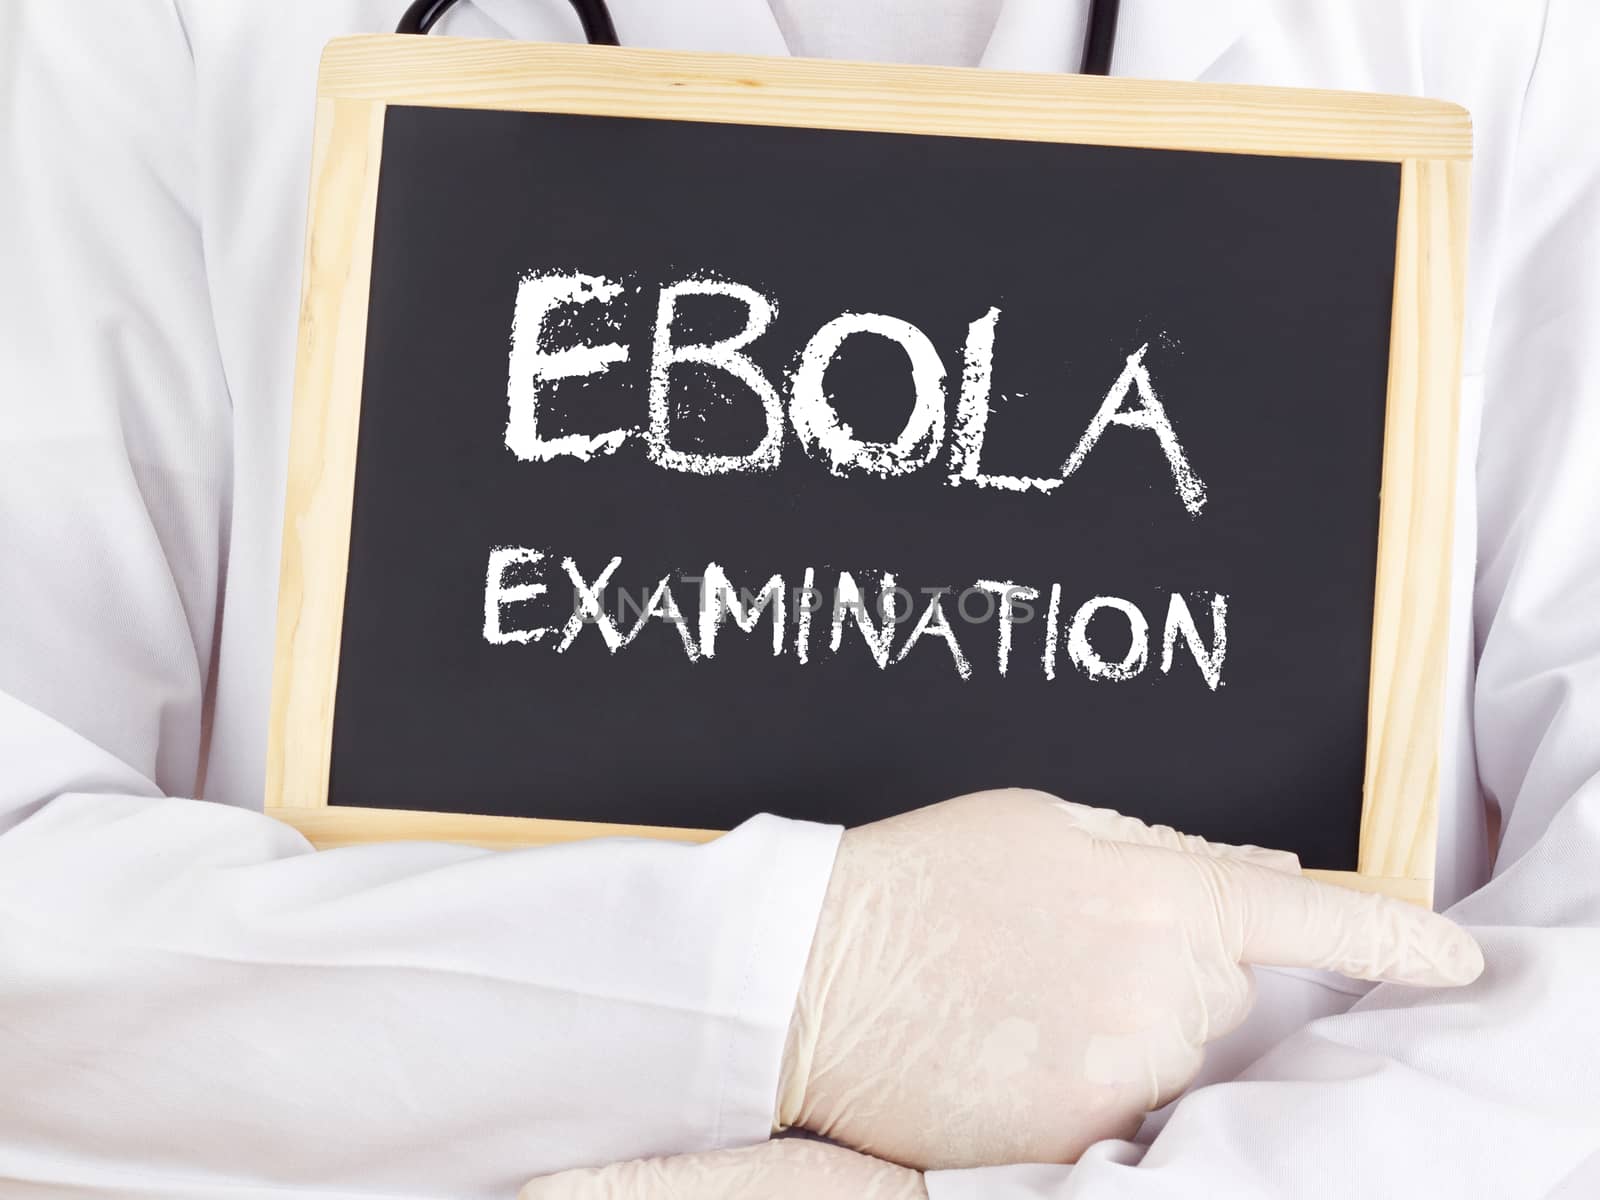 Doctor shows information: Ebola examination by gwolters